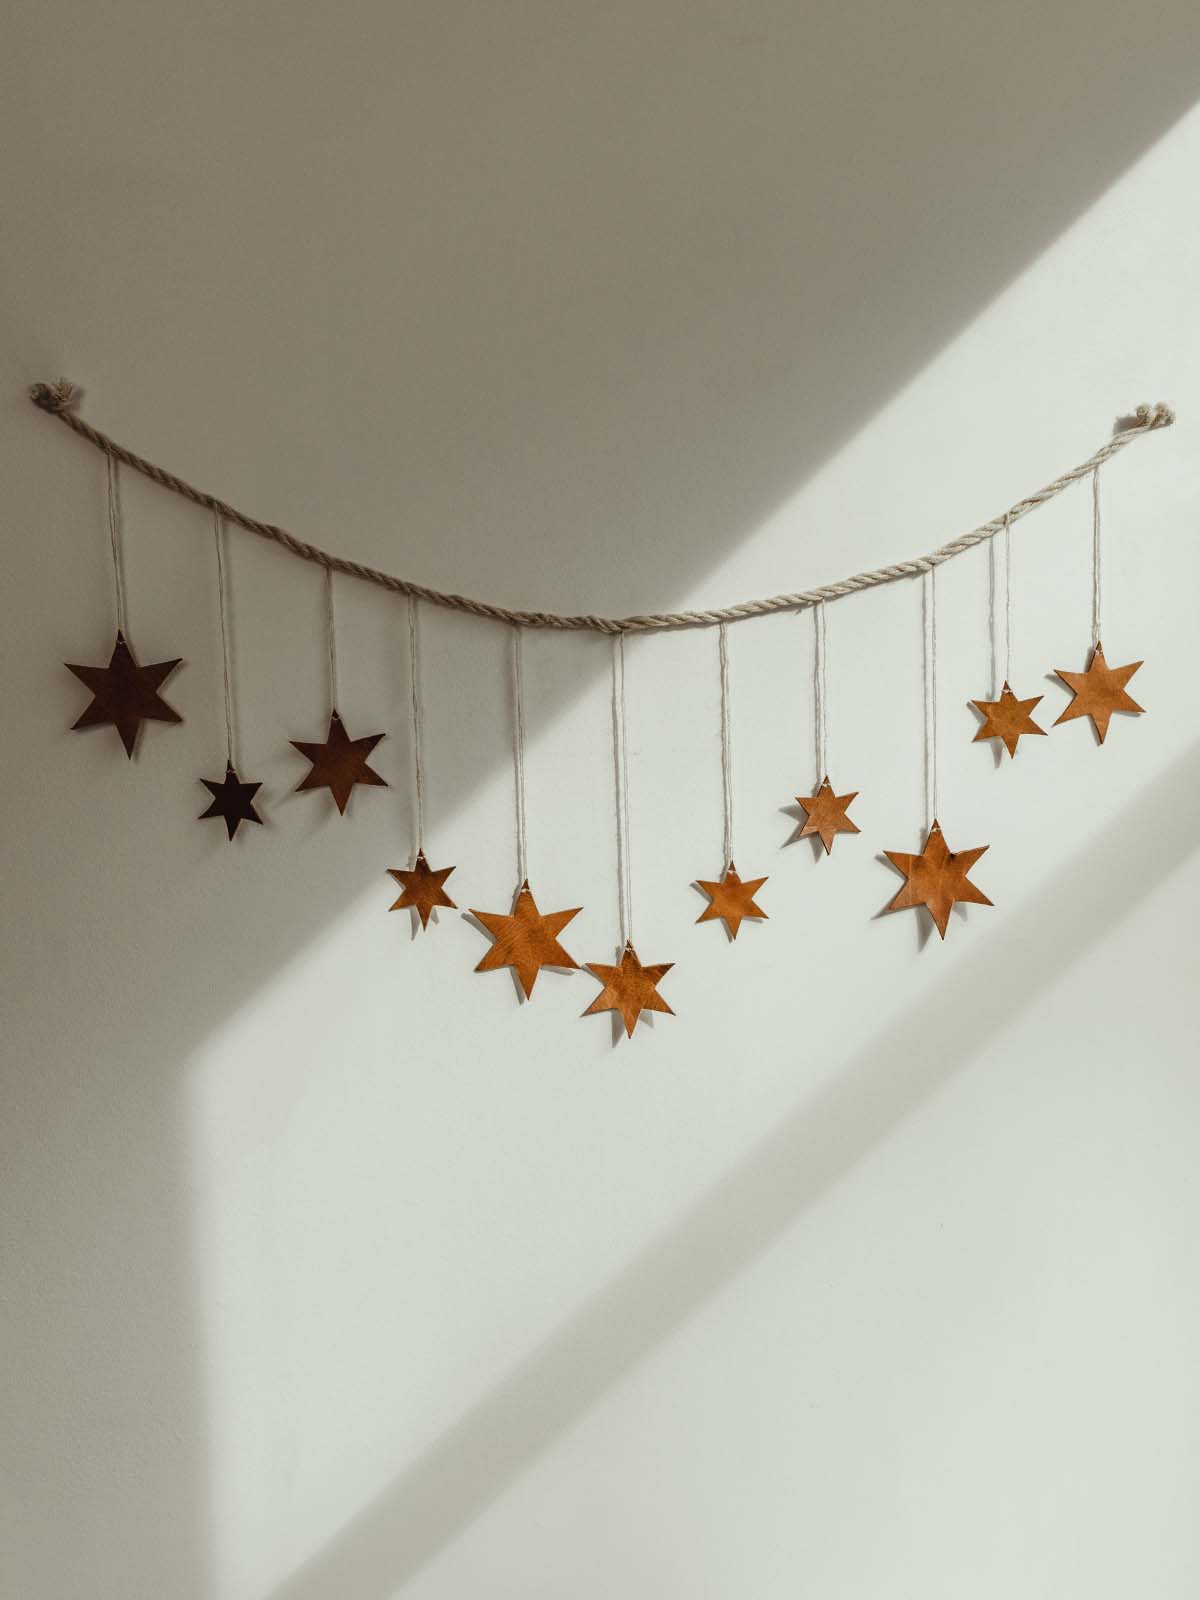 Star wall hanger with eleven leather stars string on cream string